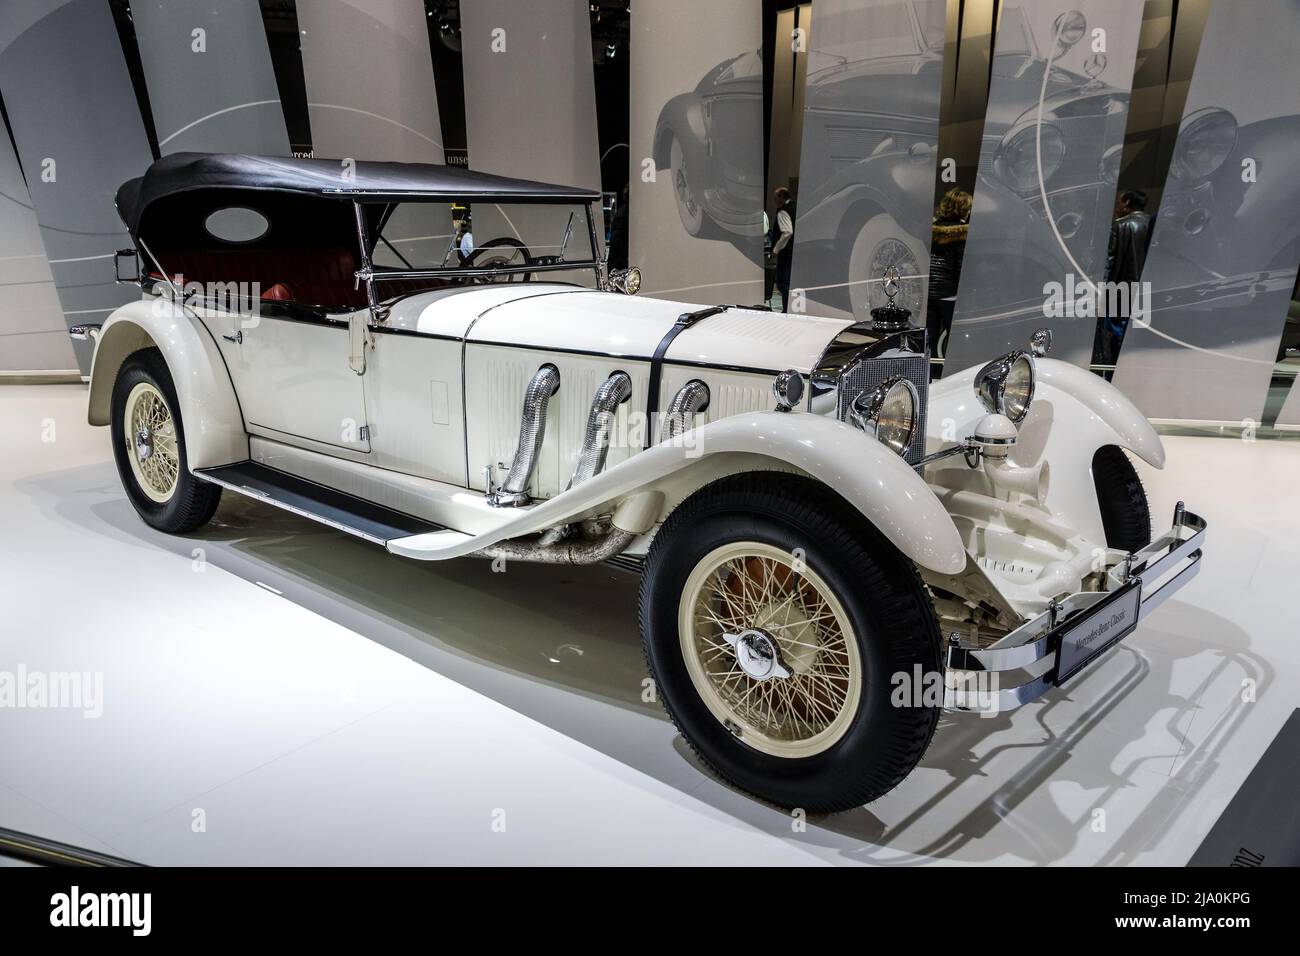 1927 Mercedes Benz Type S W06 classic car at the Techno Classica Essen Car Show. Germany - April 6, 2017 Stock Photo